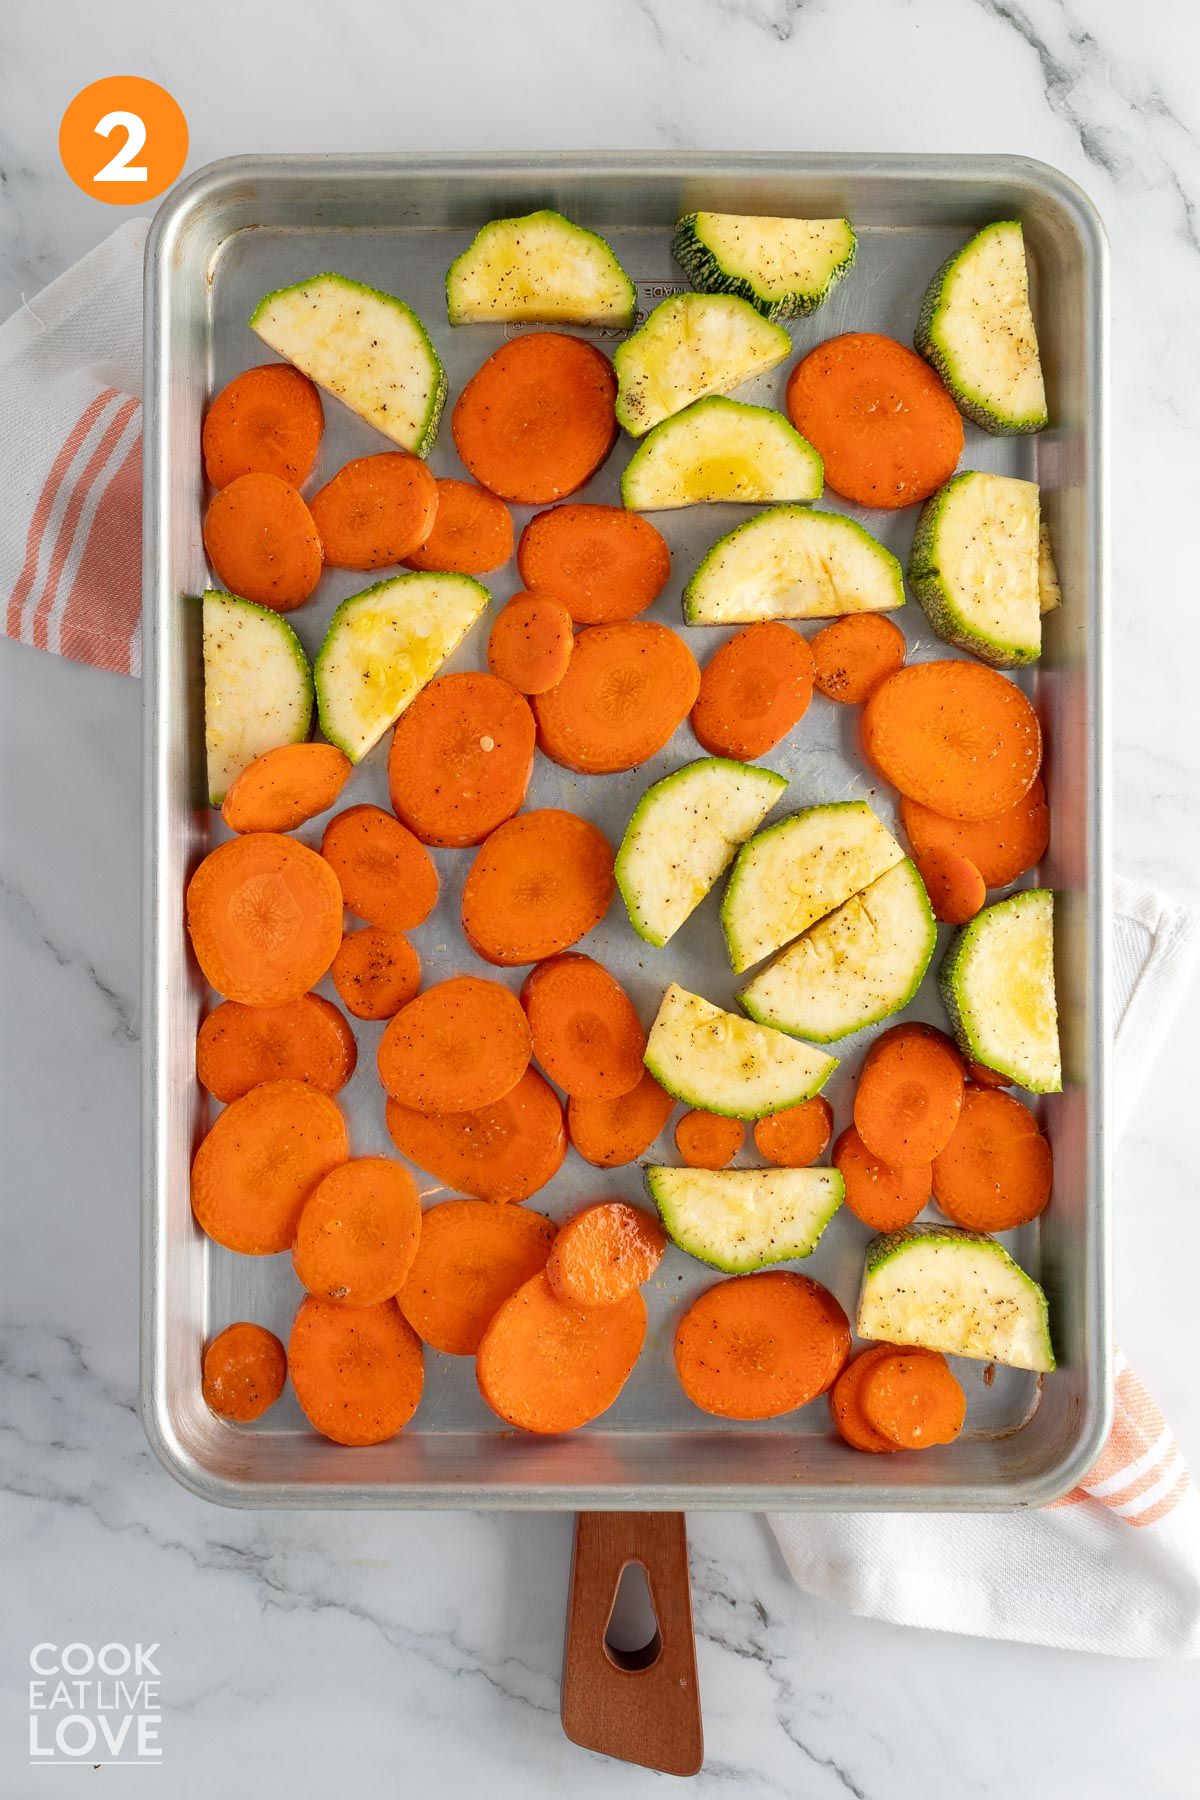 Zucchini and carrots spread out on a baking tray.